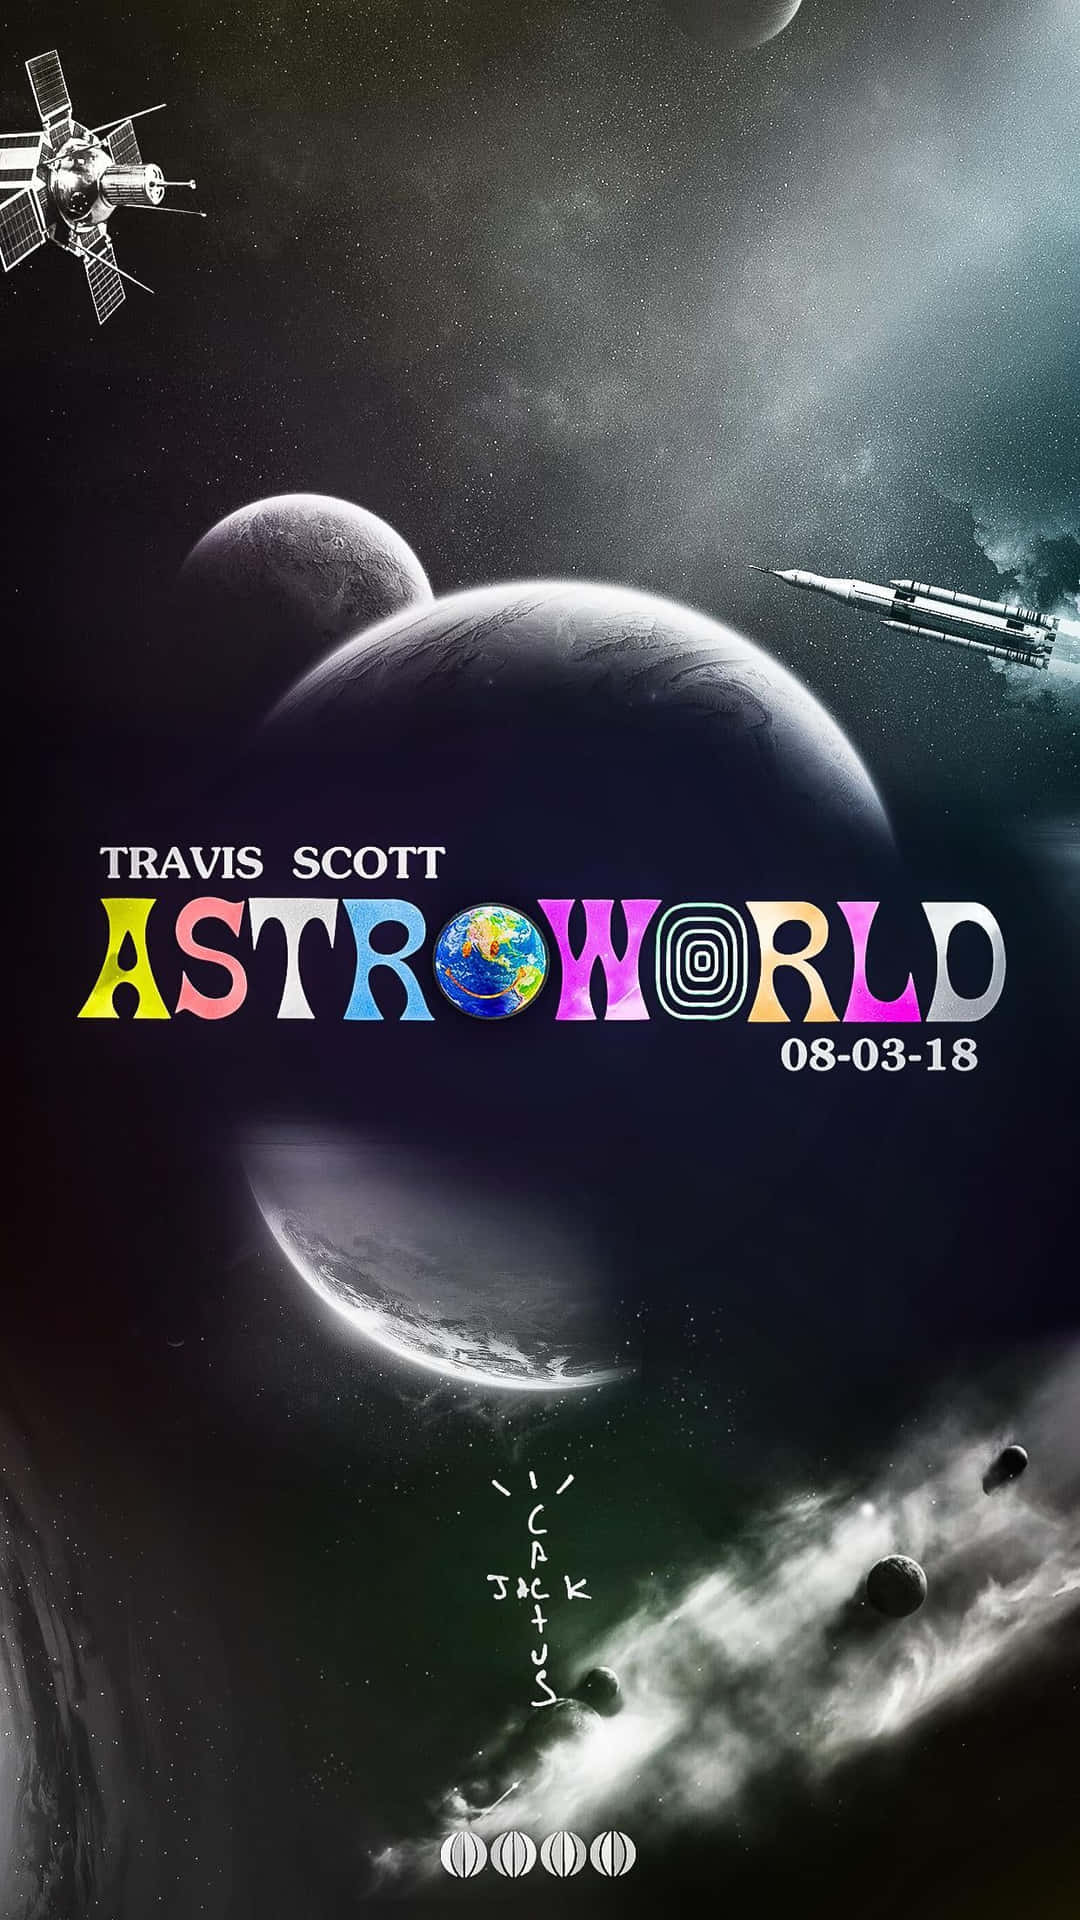 Welcome To The Rides Of Astroworld